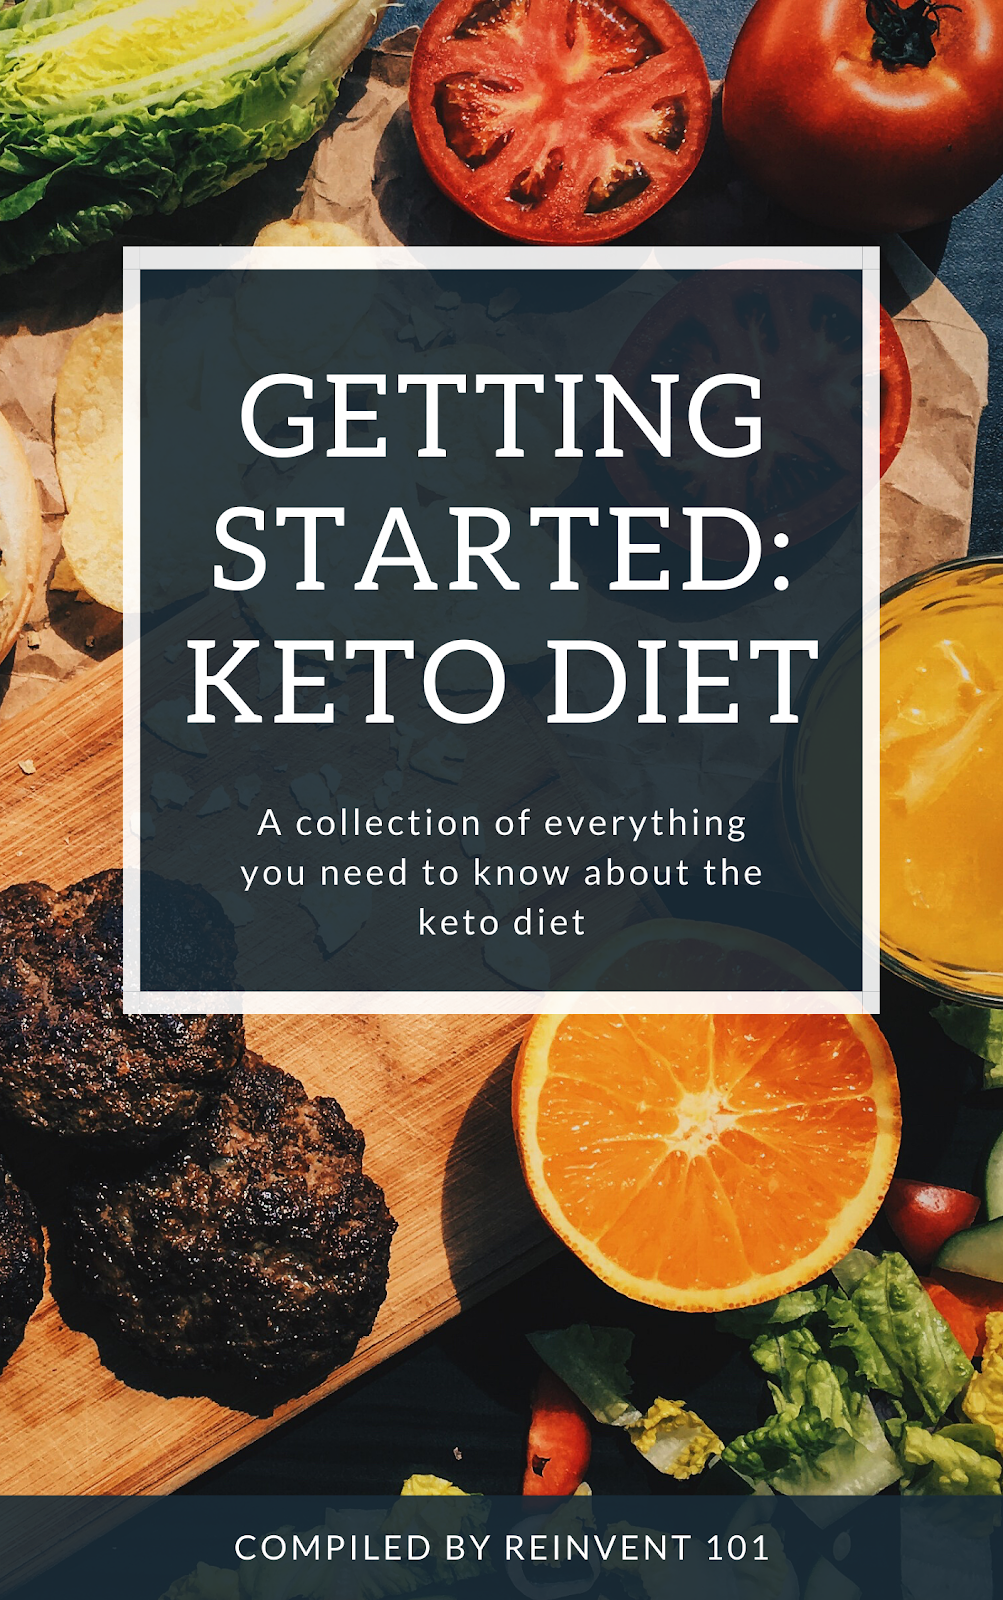 Want To Know More On Keto?